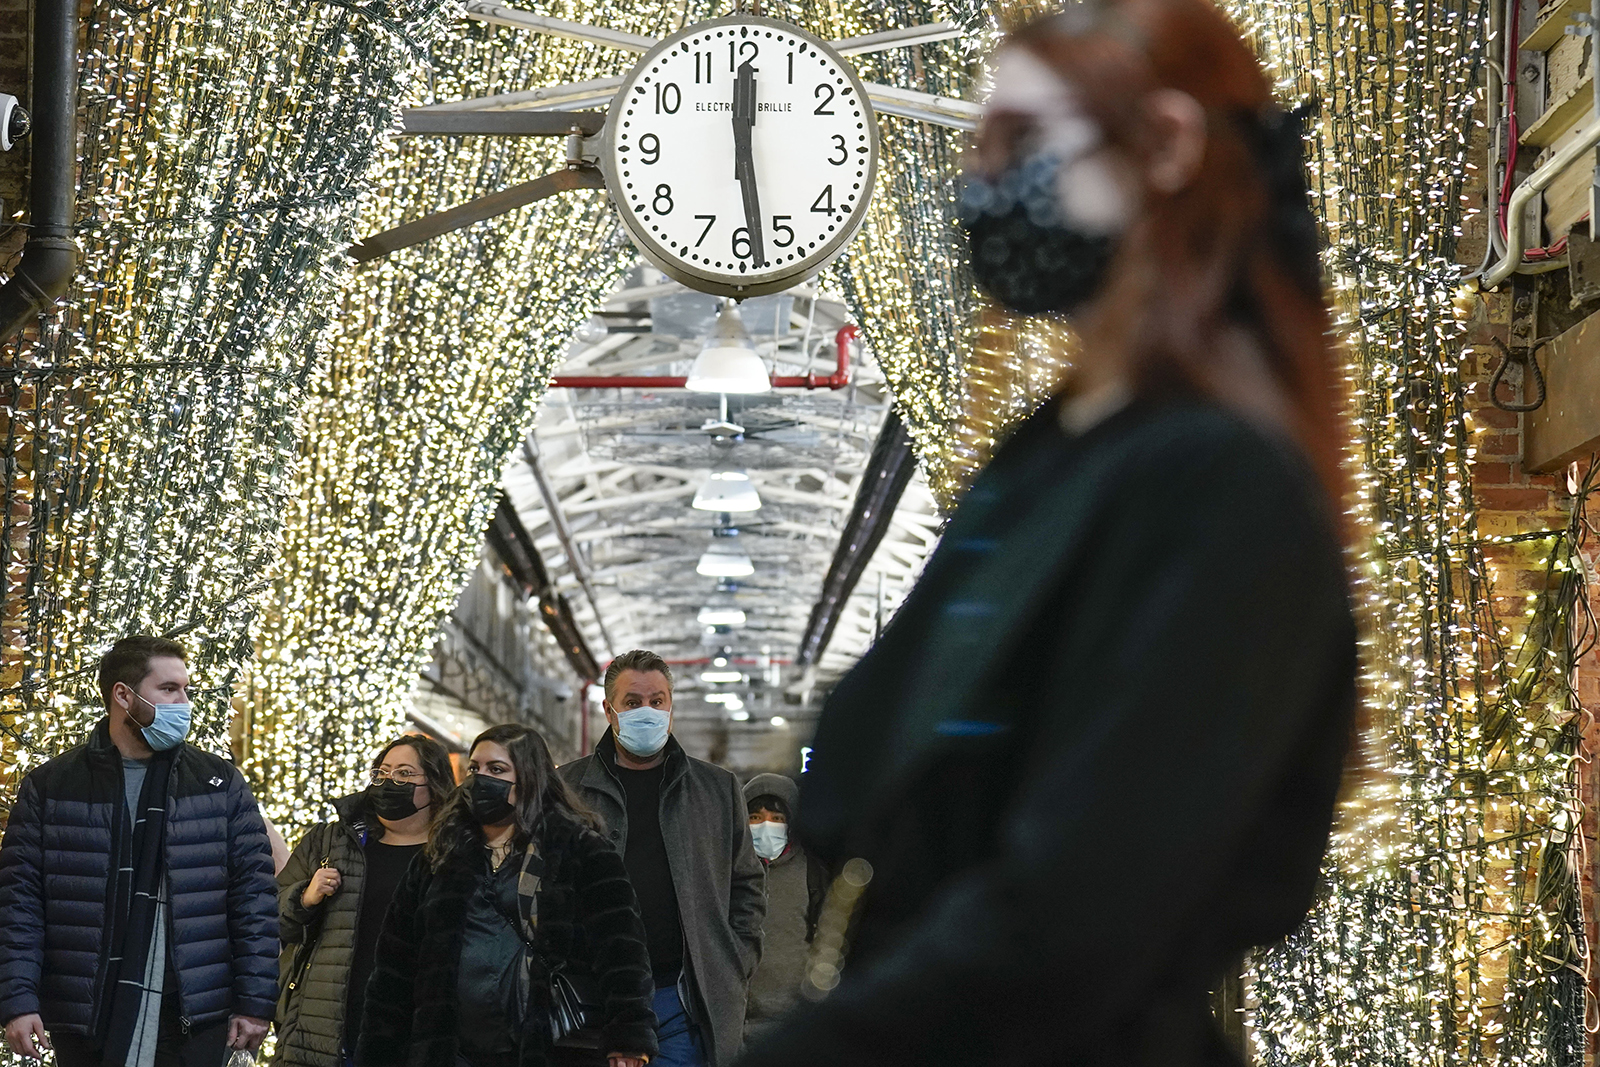 Shoppers wear masks while walking through an indoor market in New York, on Wednesday, Feb. 9.